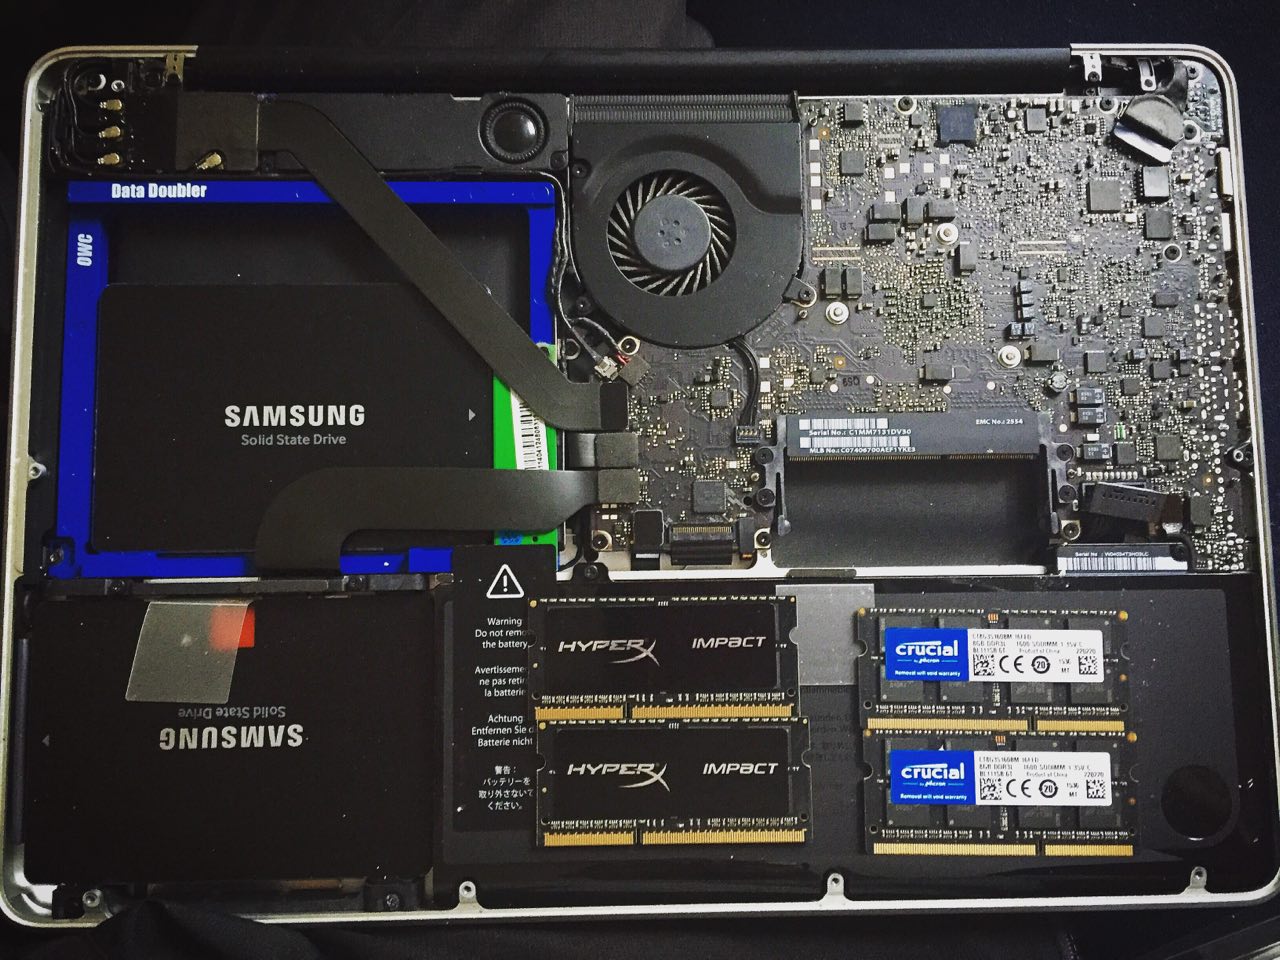 16GB 1600mhz vs 16GB 1866mhz RAM for Macbook Pro 13" mid 2012 | Forums